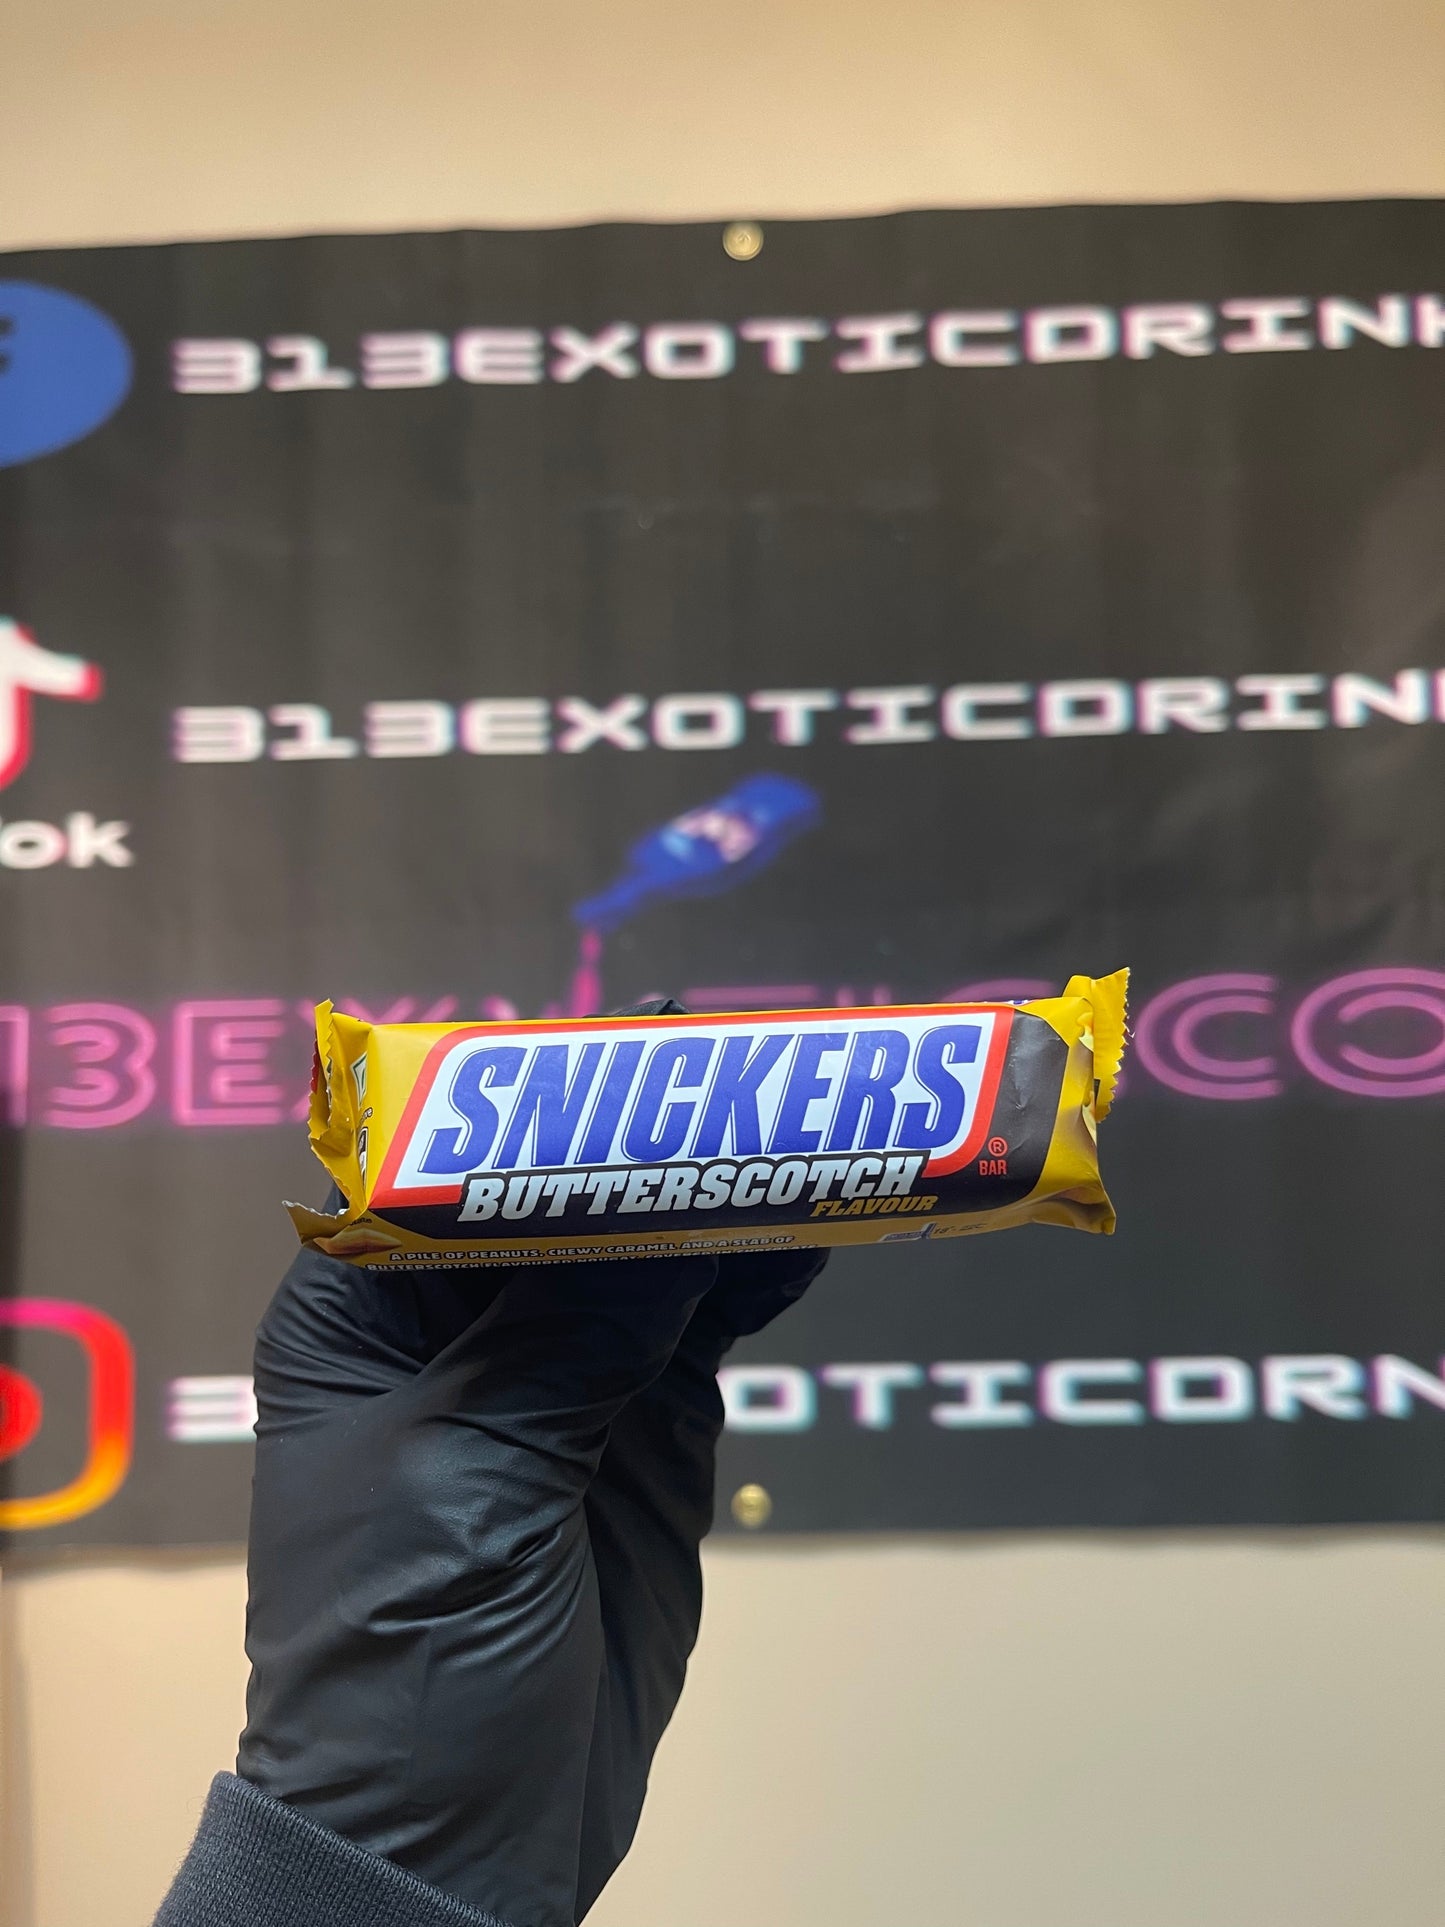 Snickers Butterscotch Case